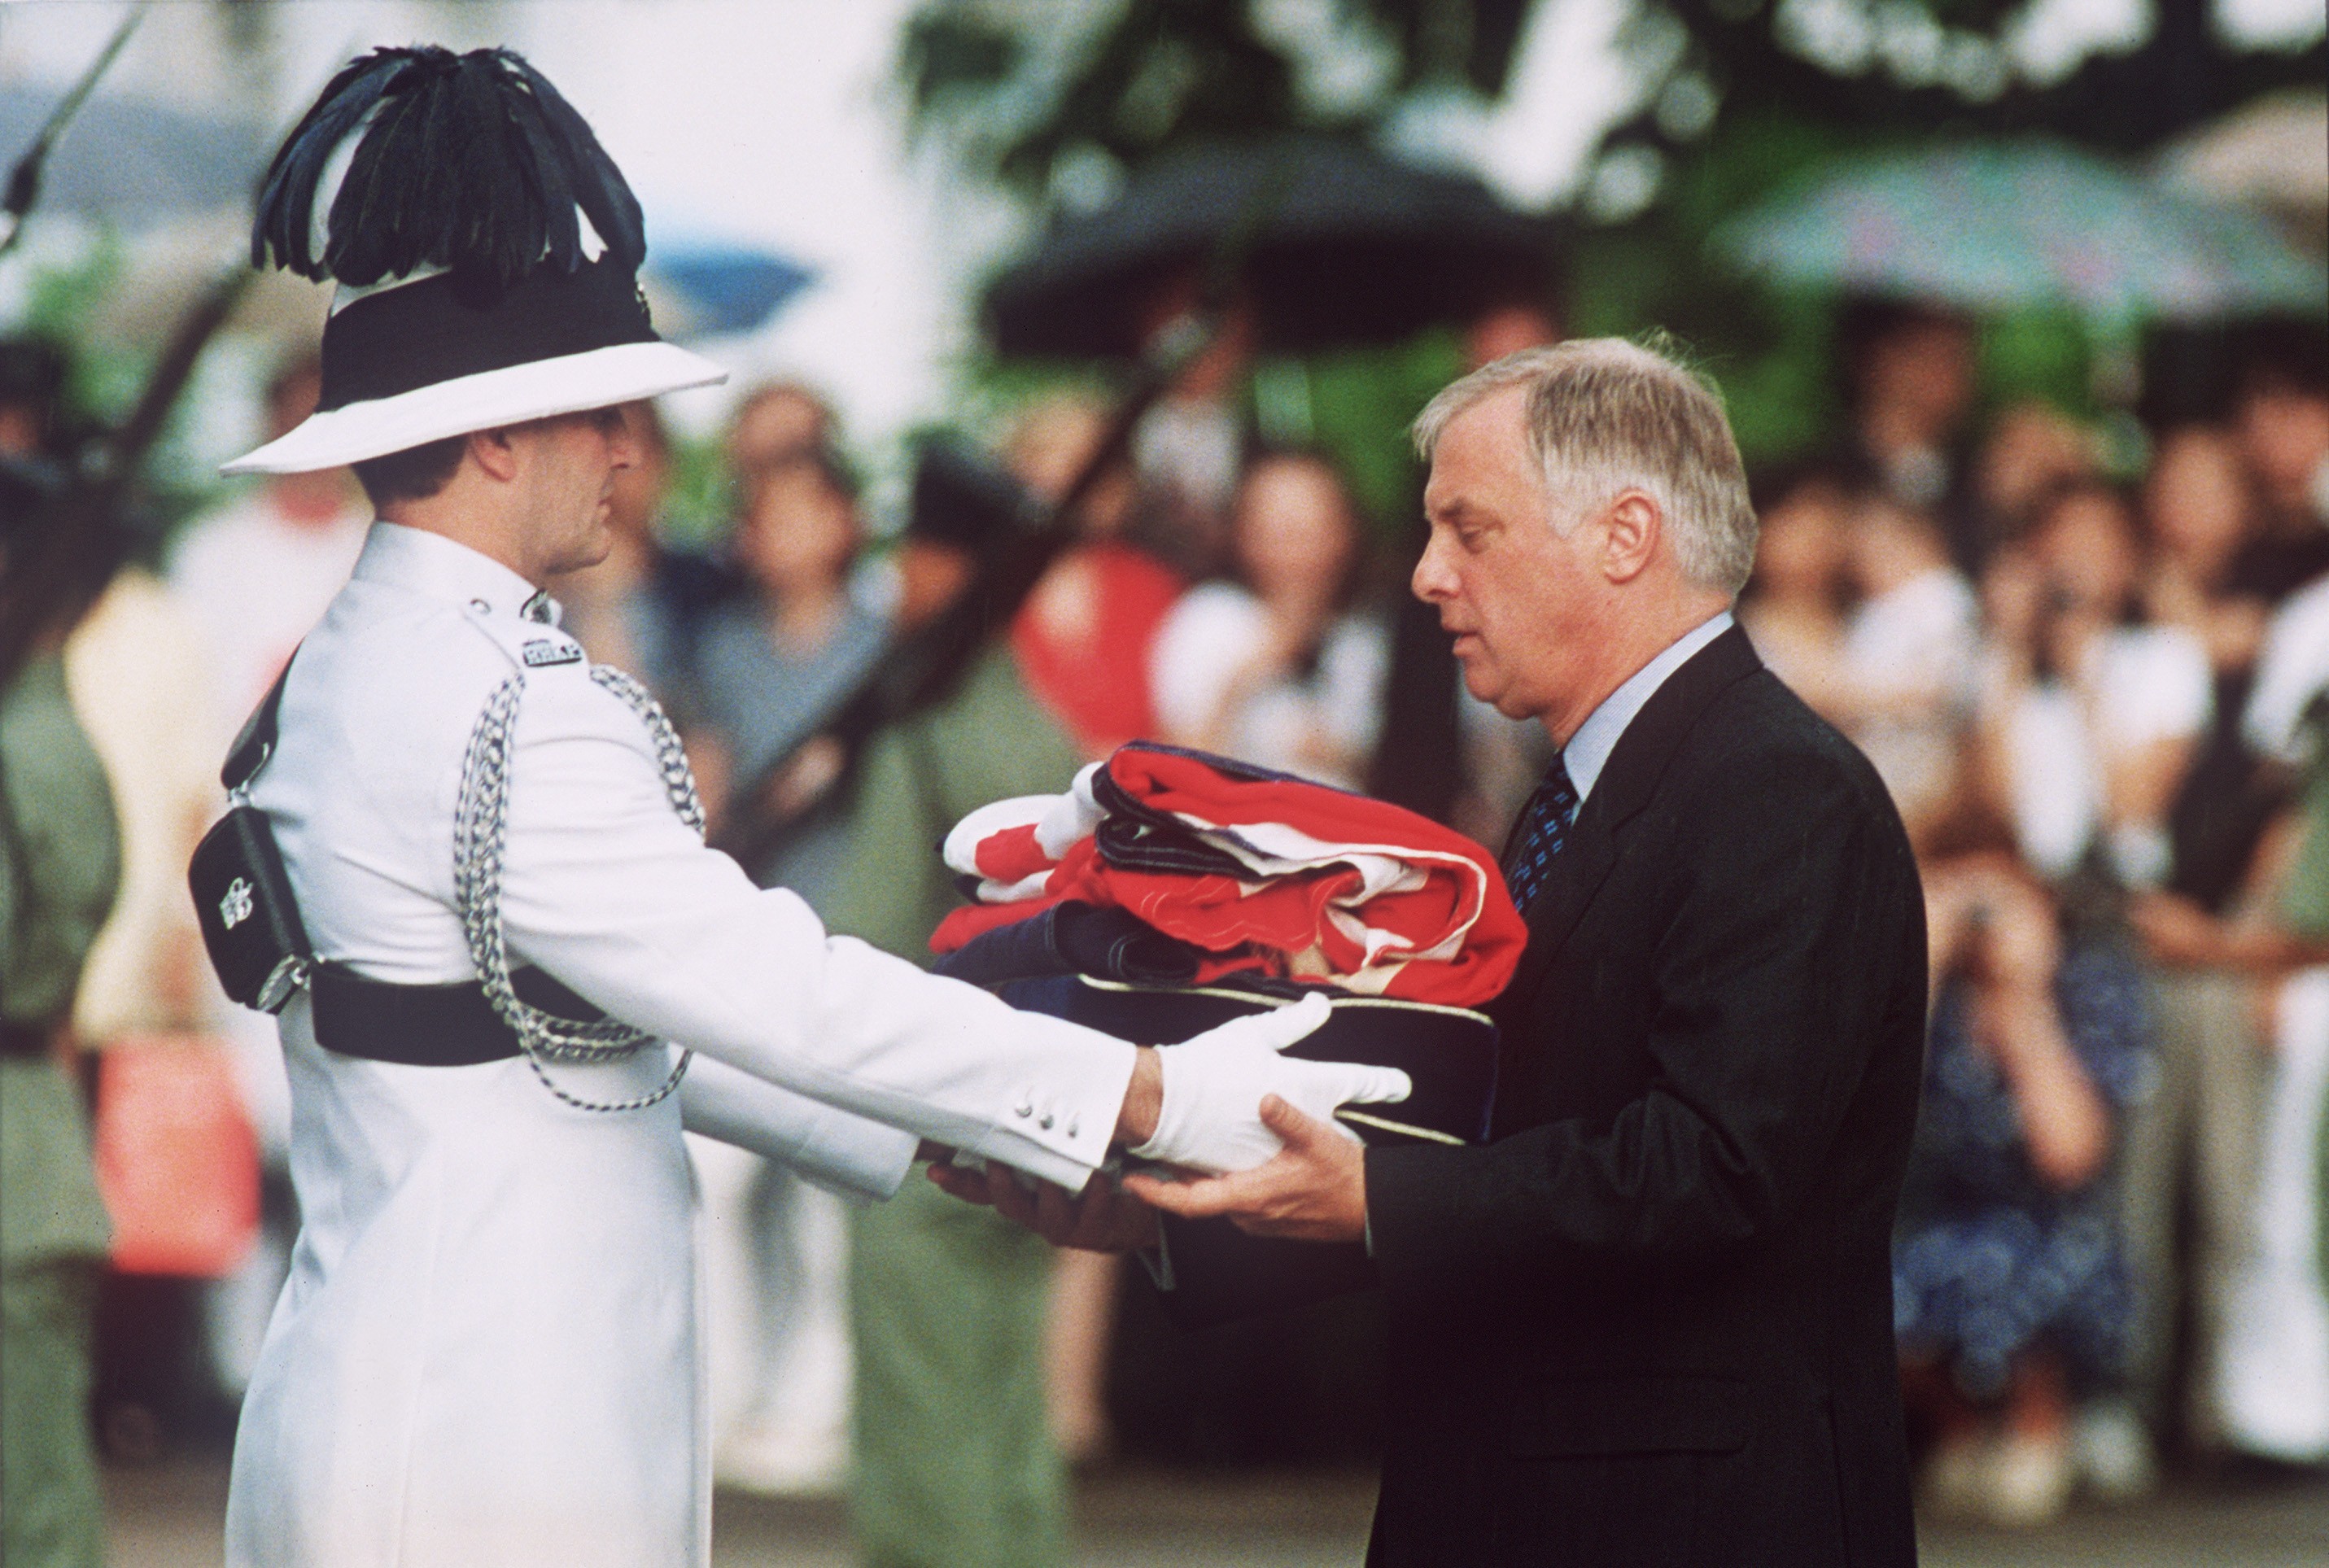 Chris Patten, the last governor of colonial Hong Kong, receives the Union Flag after it was lowered for the last time at Government House on June 30, 1997. Photo: AFP